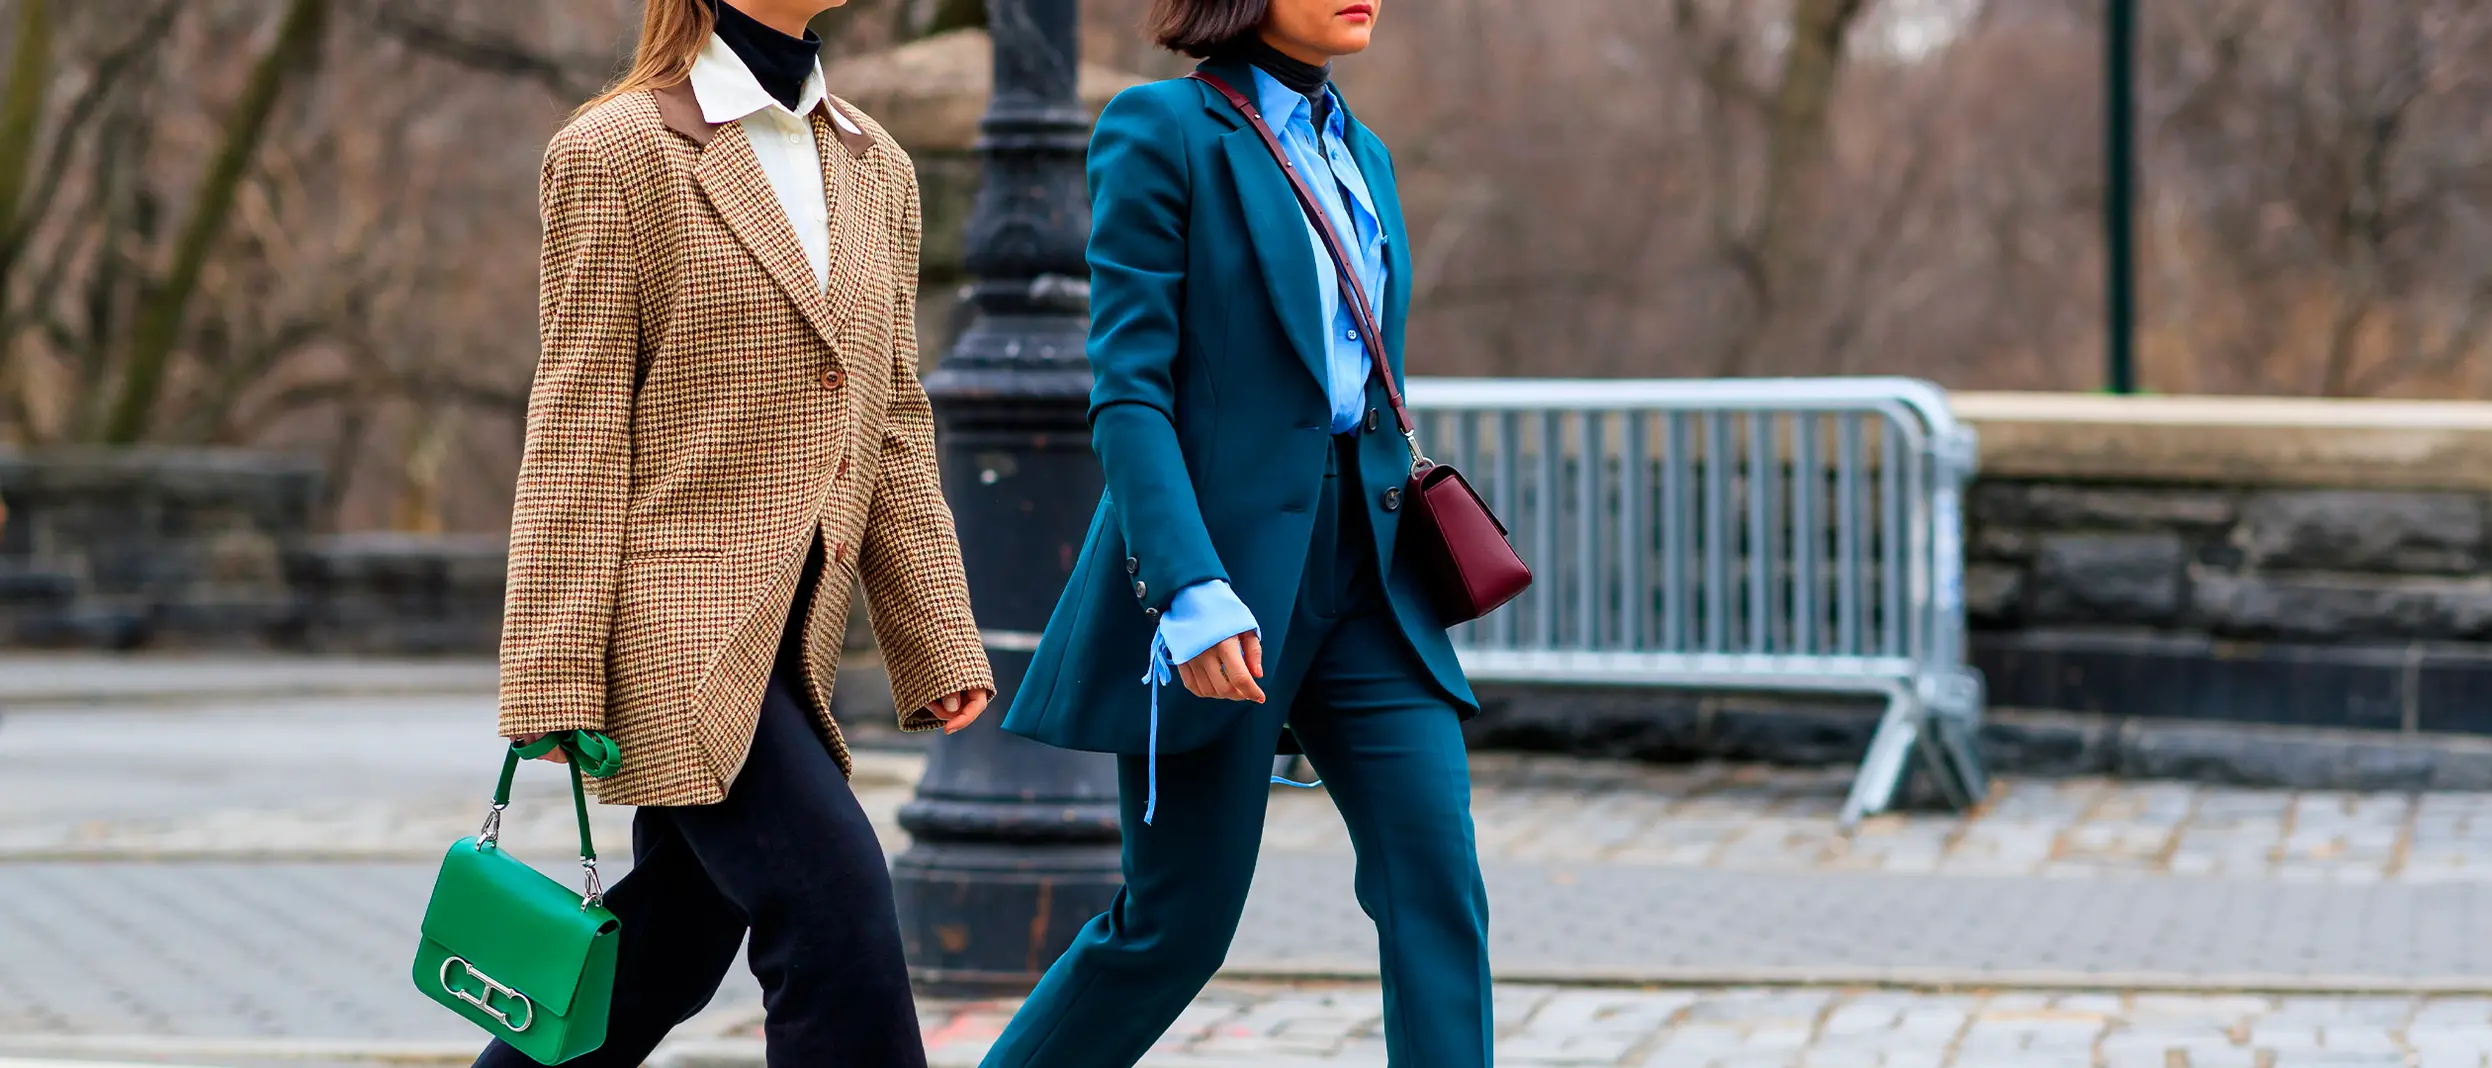 women-with-luxury-second-hand-suits.jpg